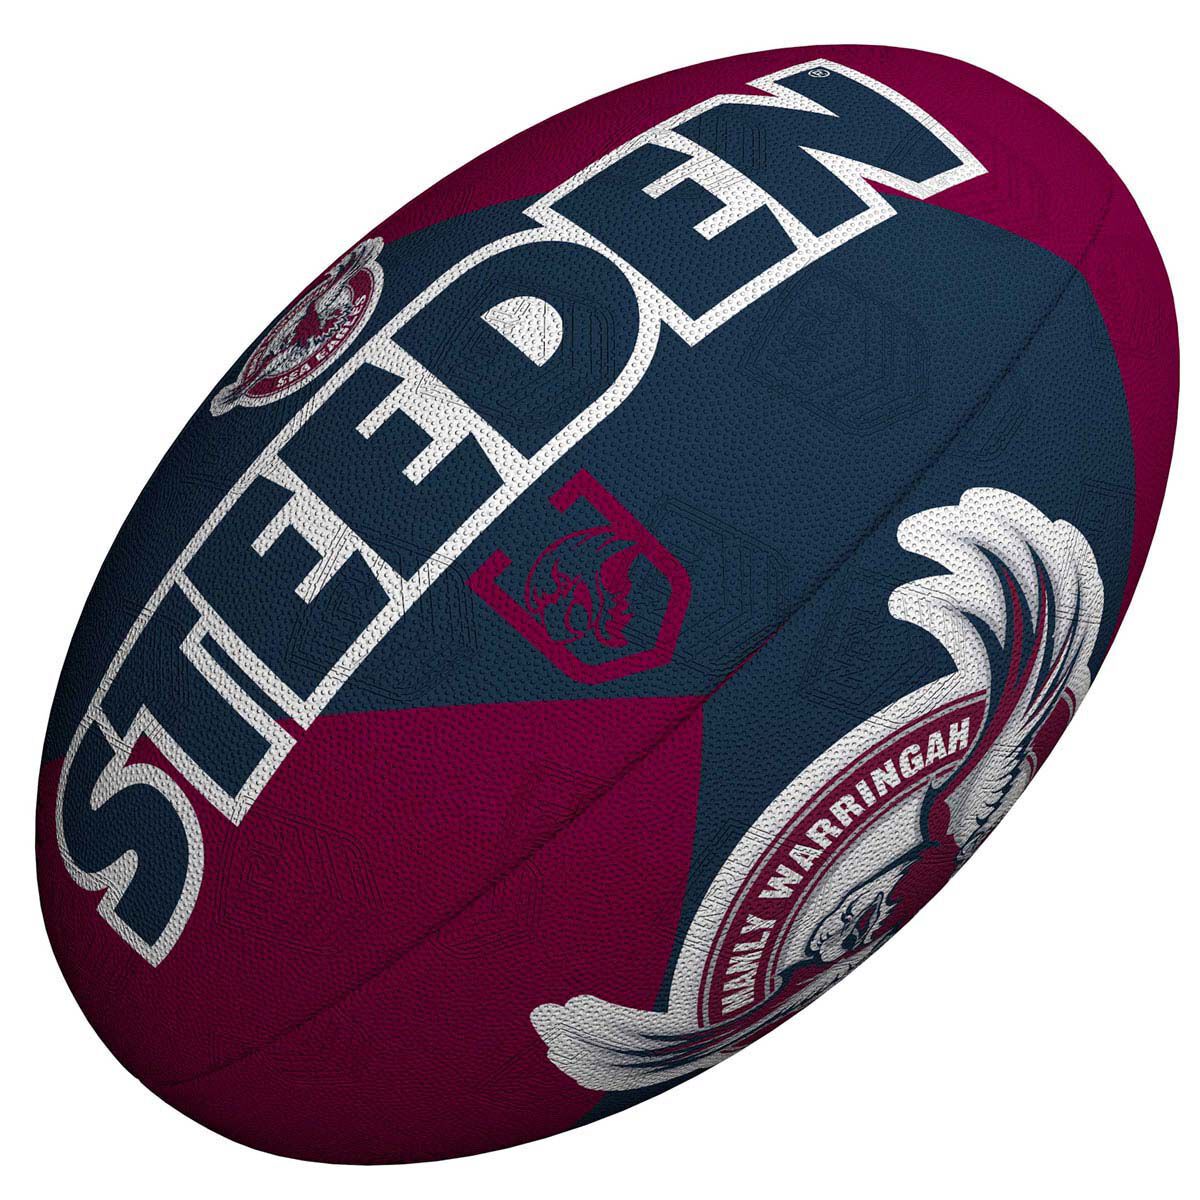 Gift Box Rugby League Football Manly Sea Eagles NRL Desk Clock 